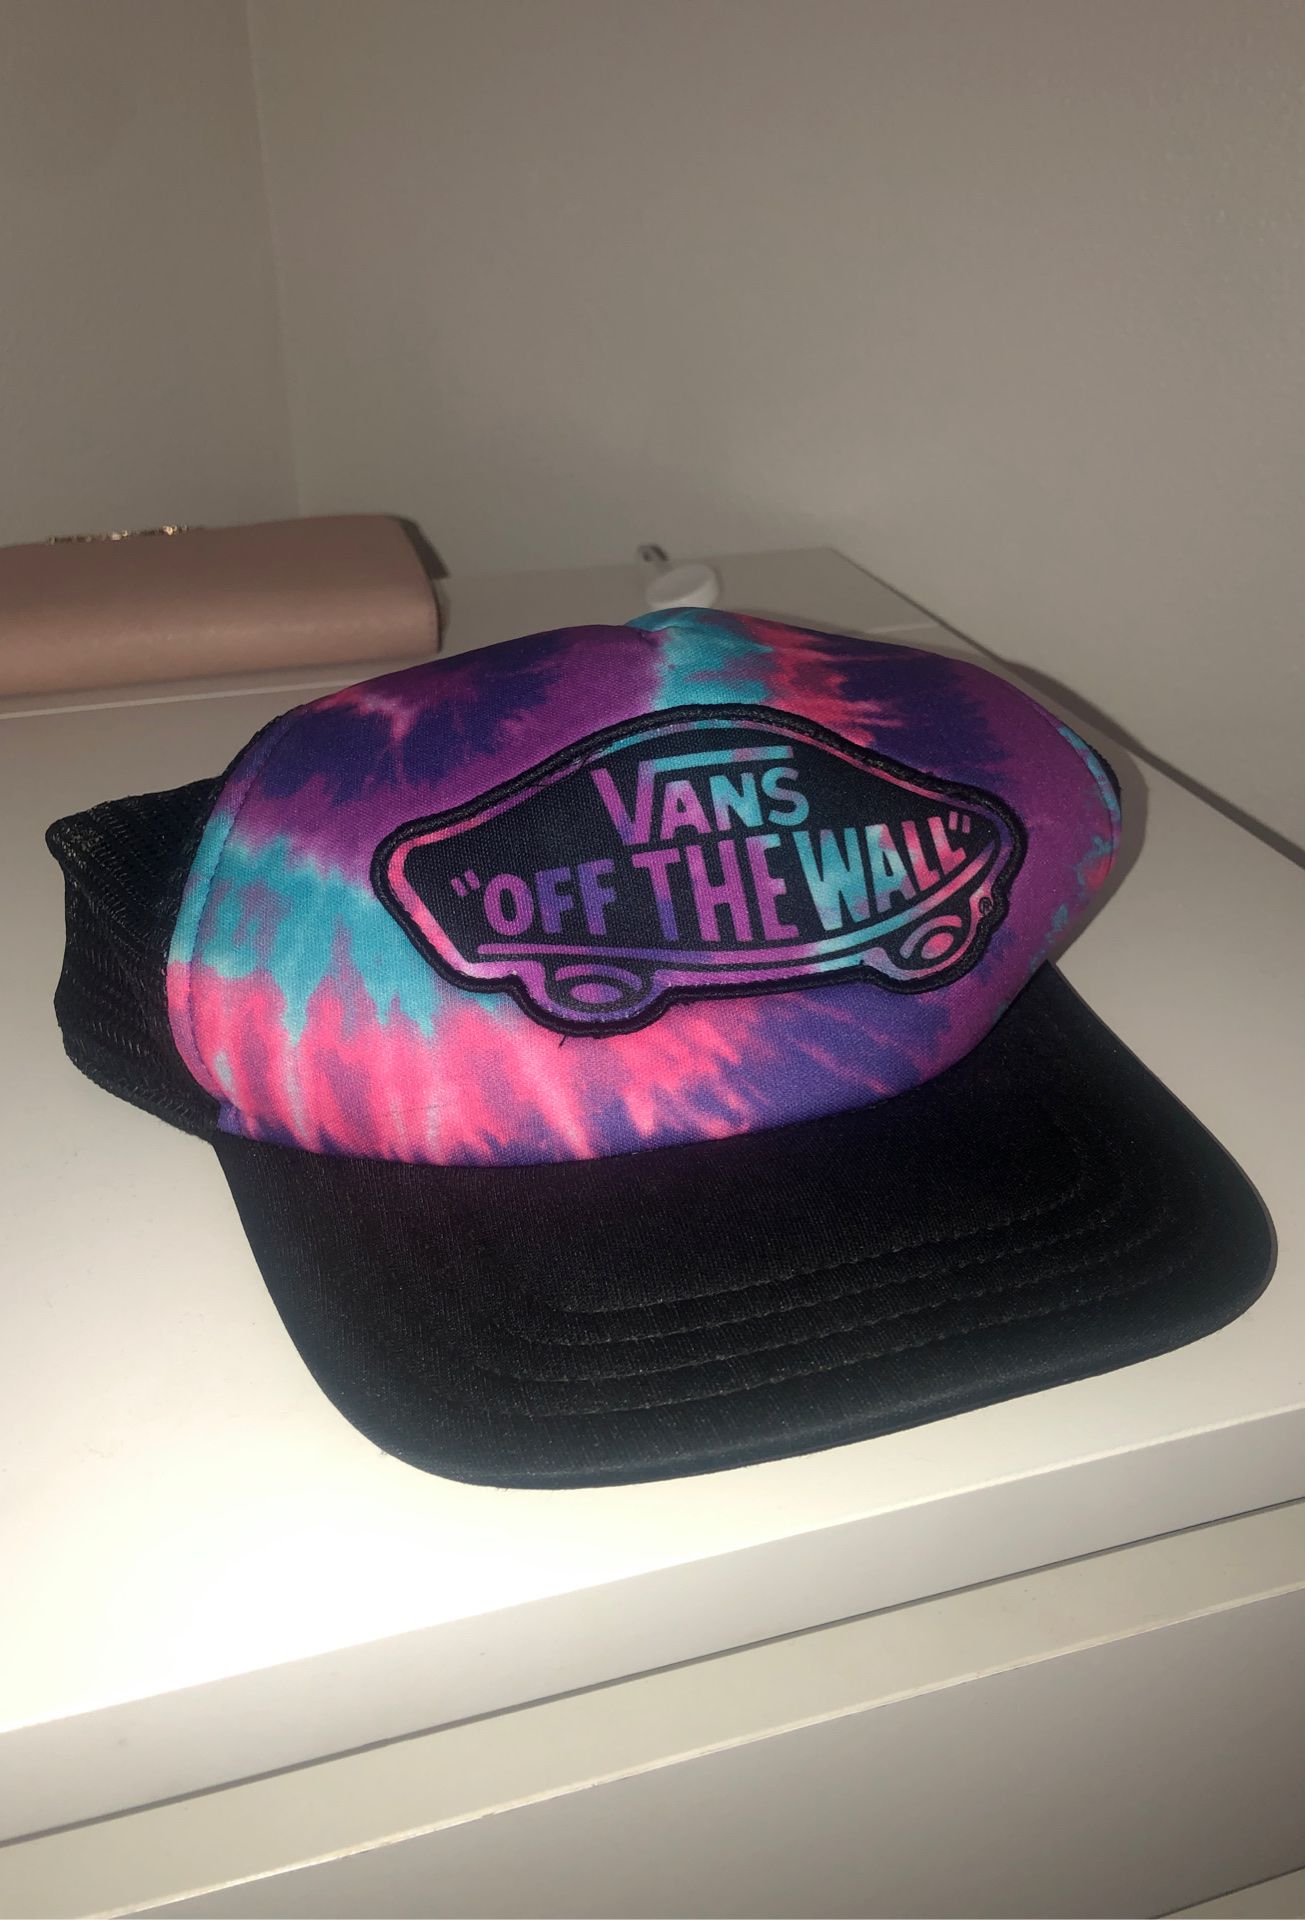 Vans off the wall hat